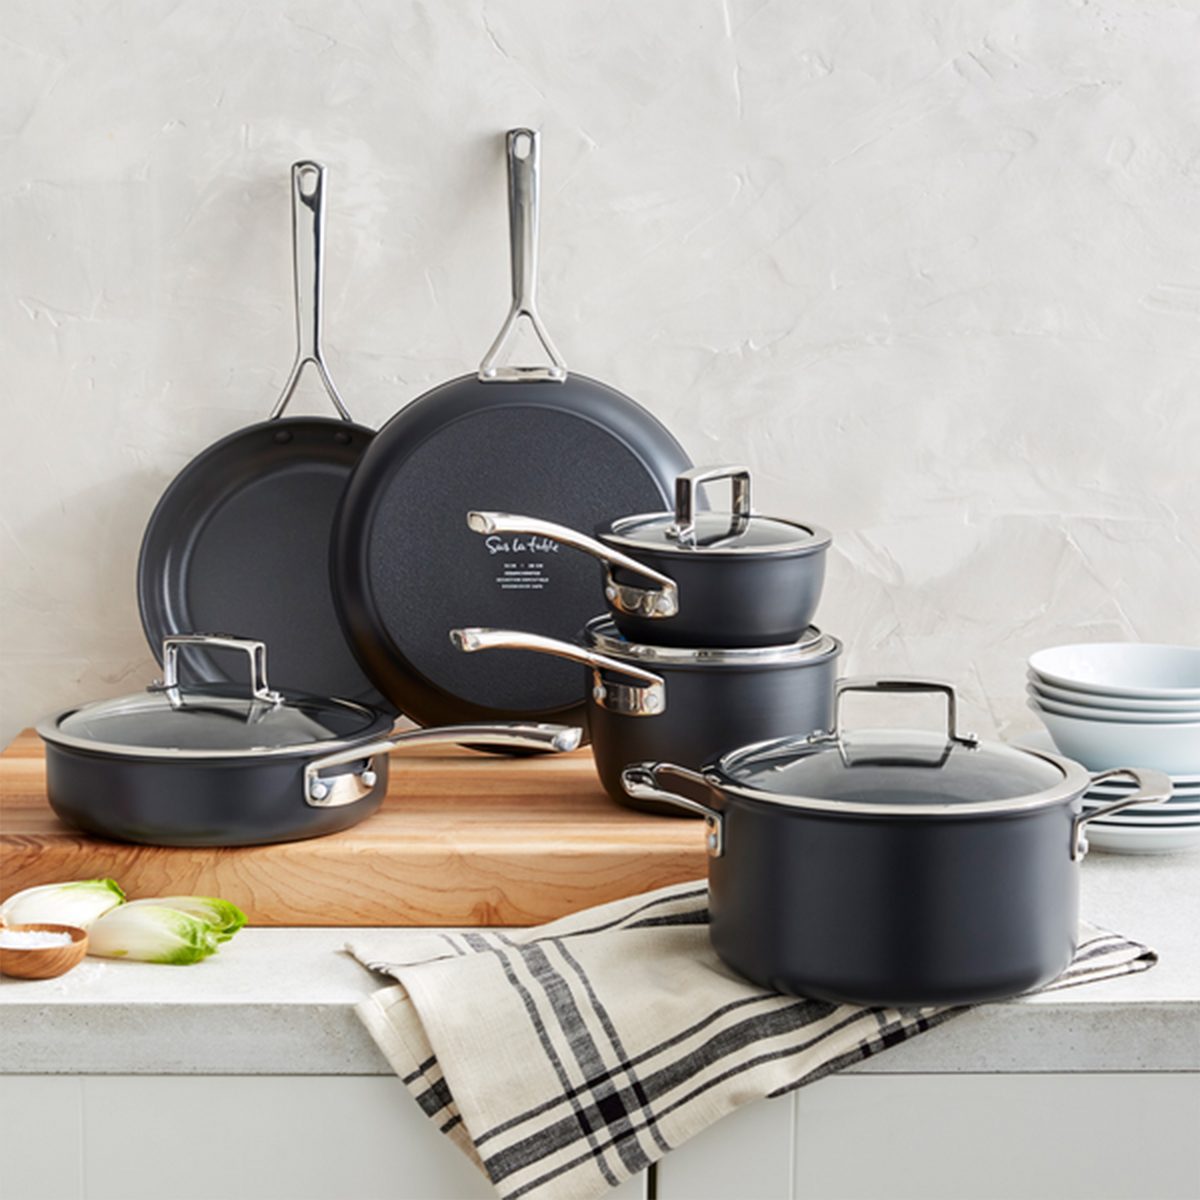 All-Clad Enameled Cast Iron 10-Piece Cookware Set